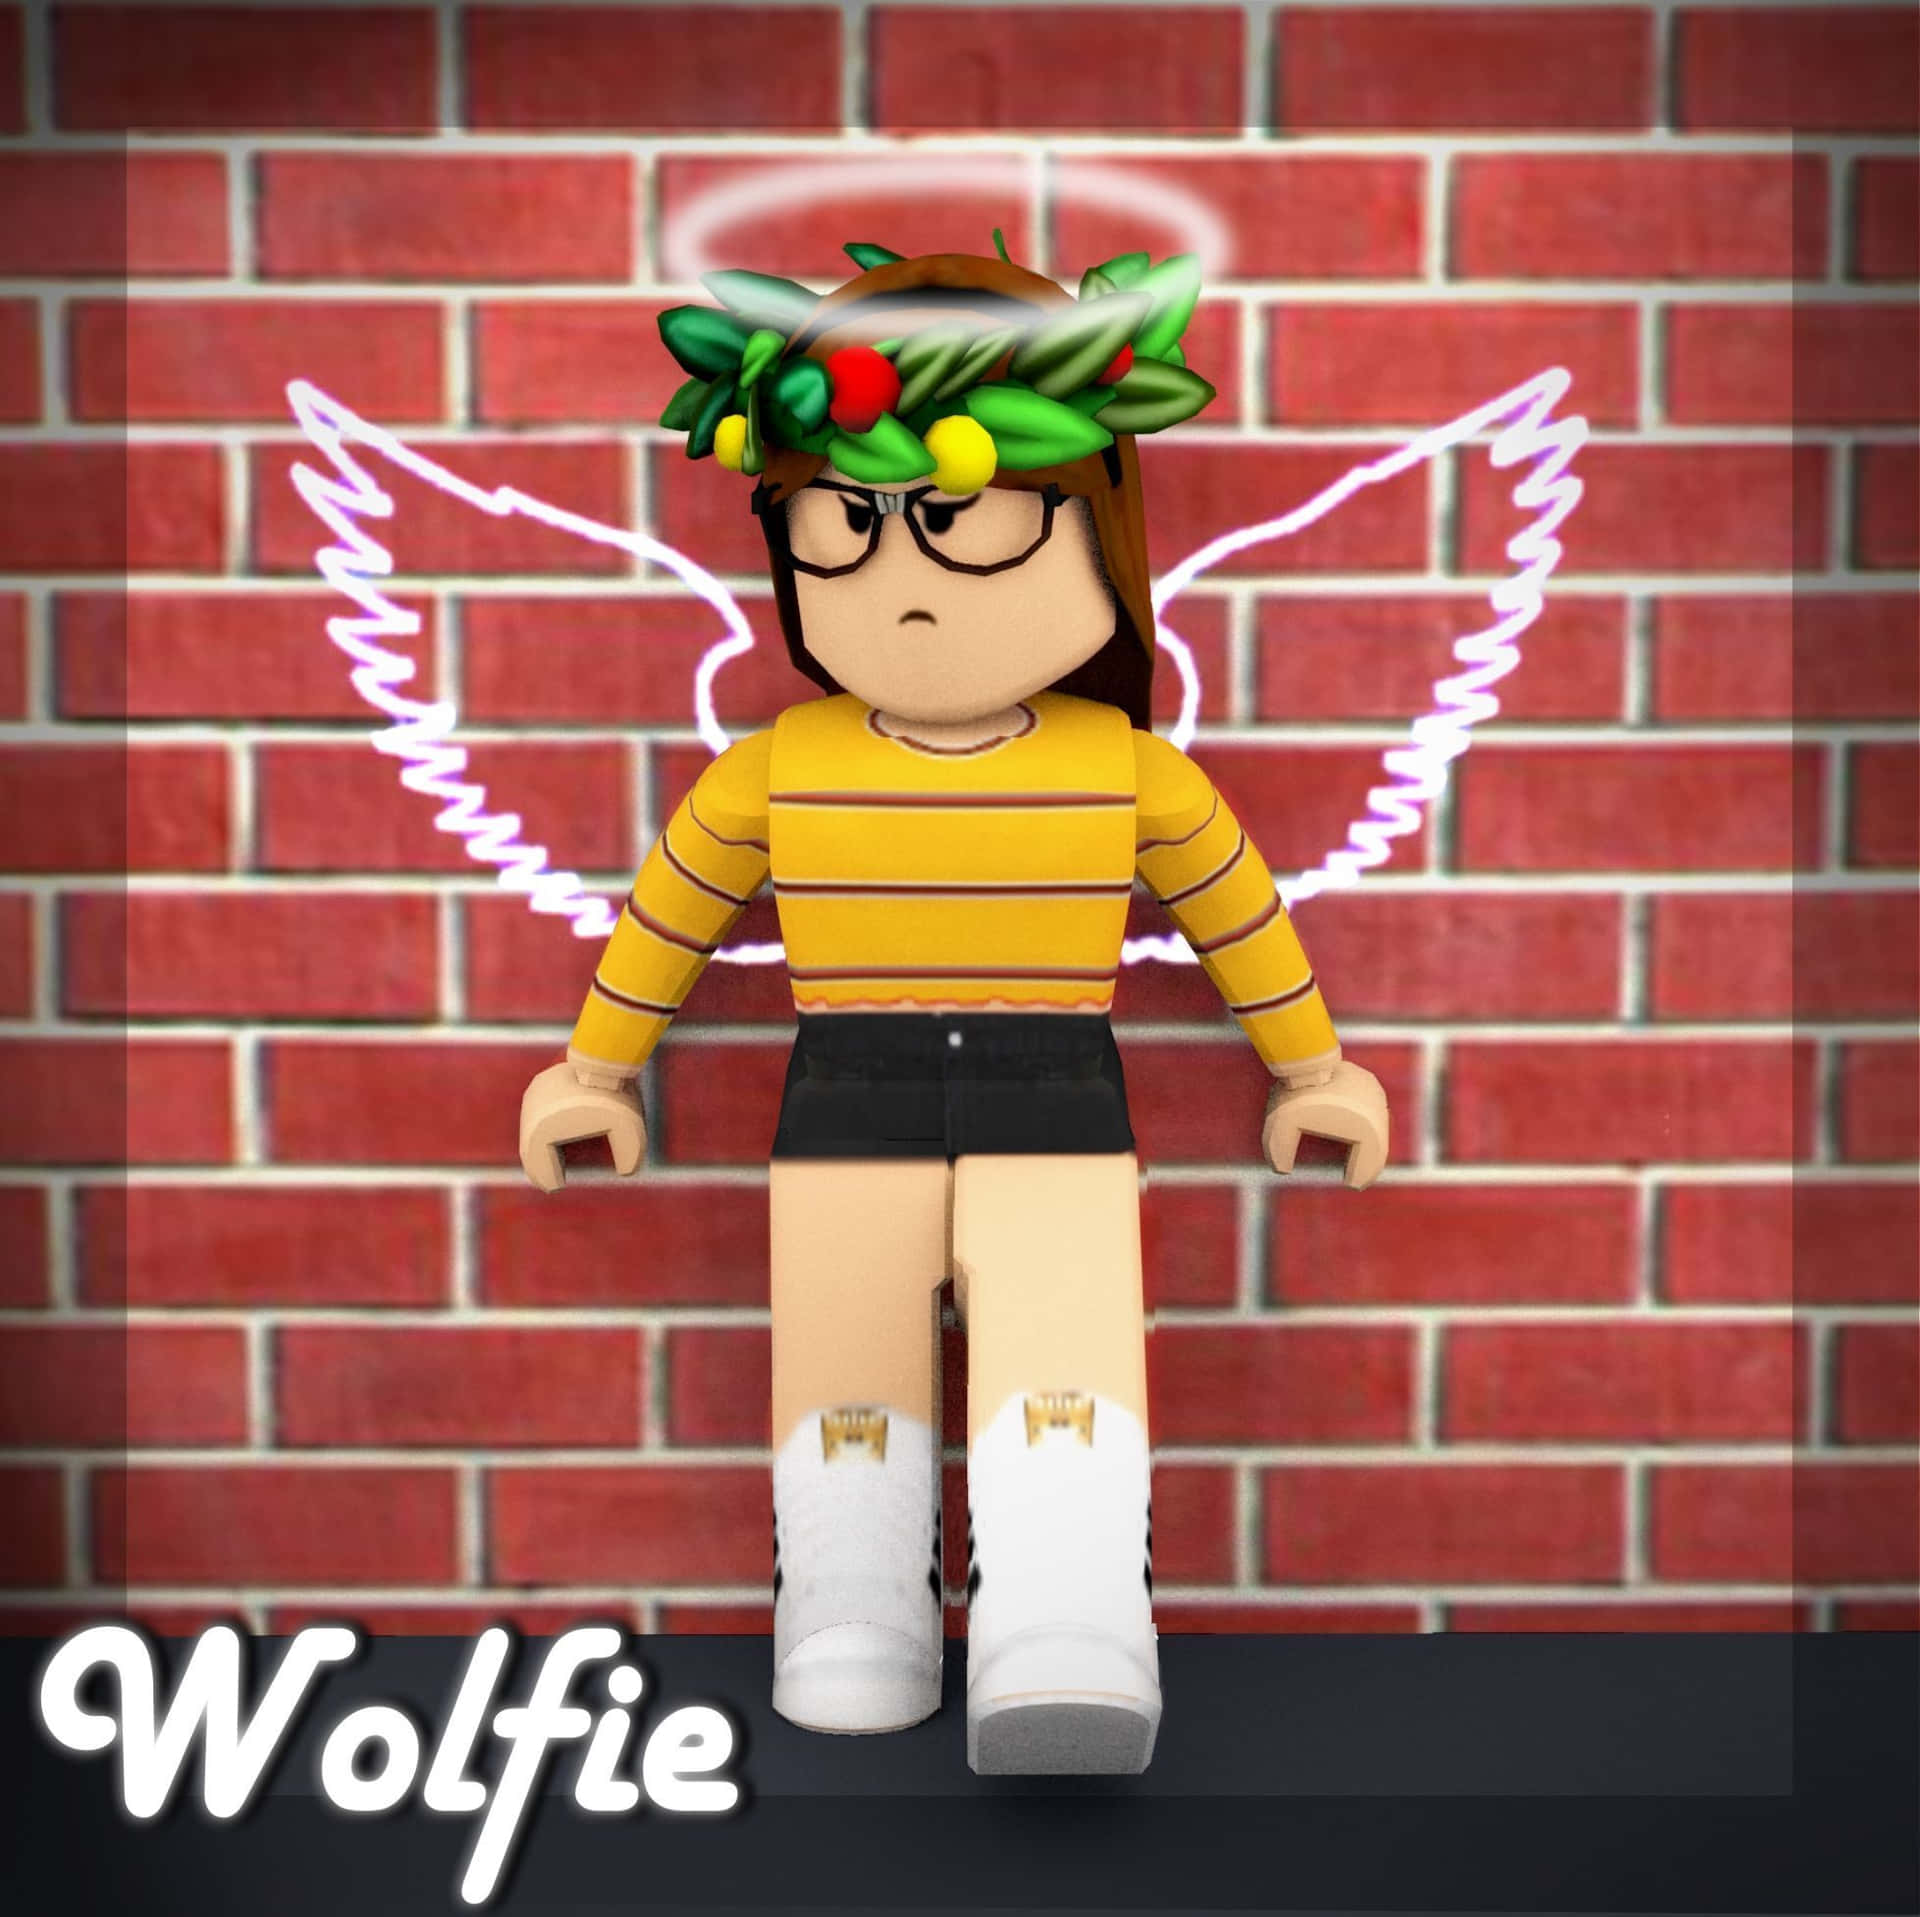 Get ready to explore the world of Cute Roblox with these adorable avatars!